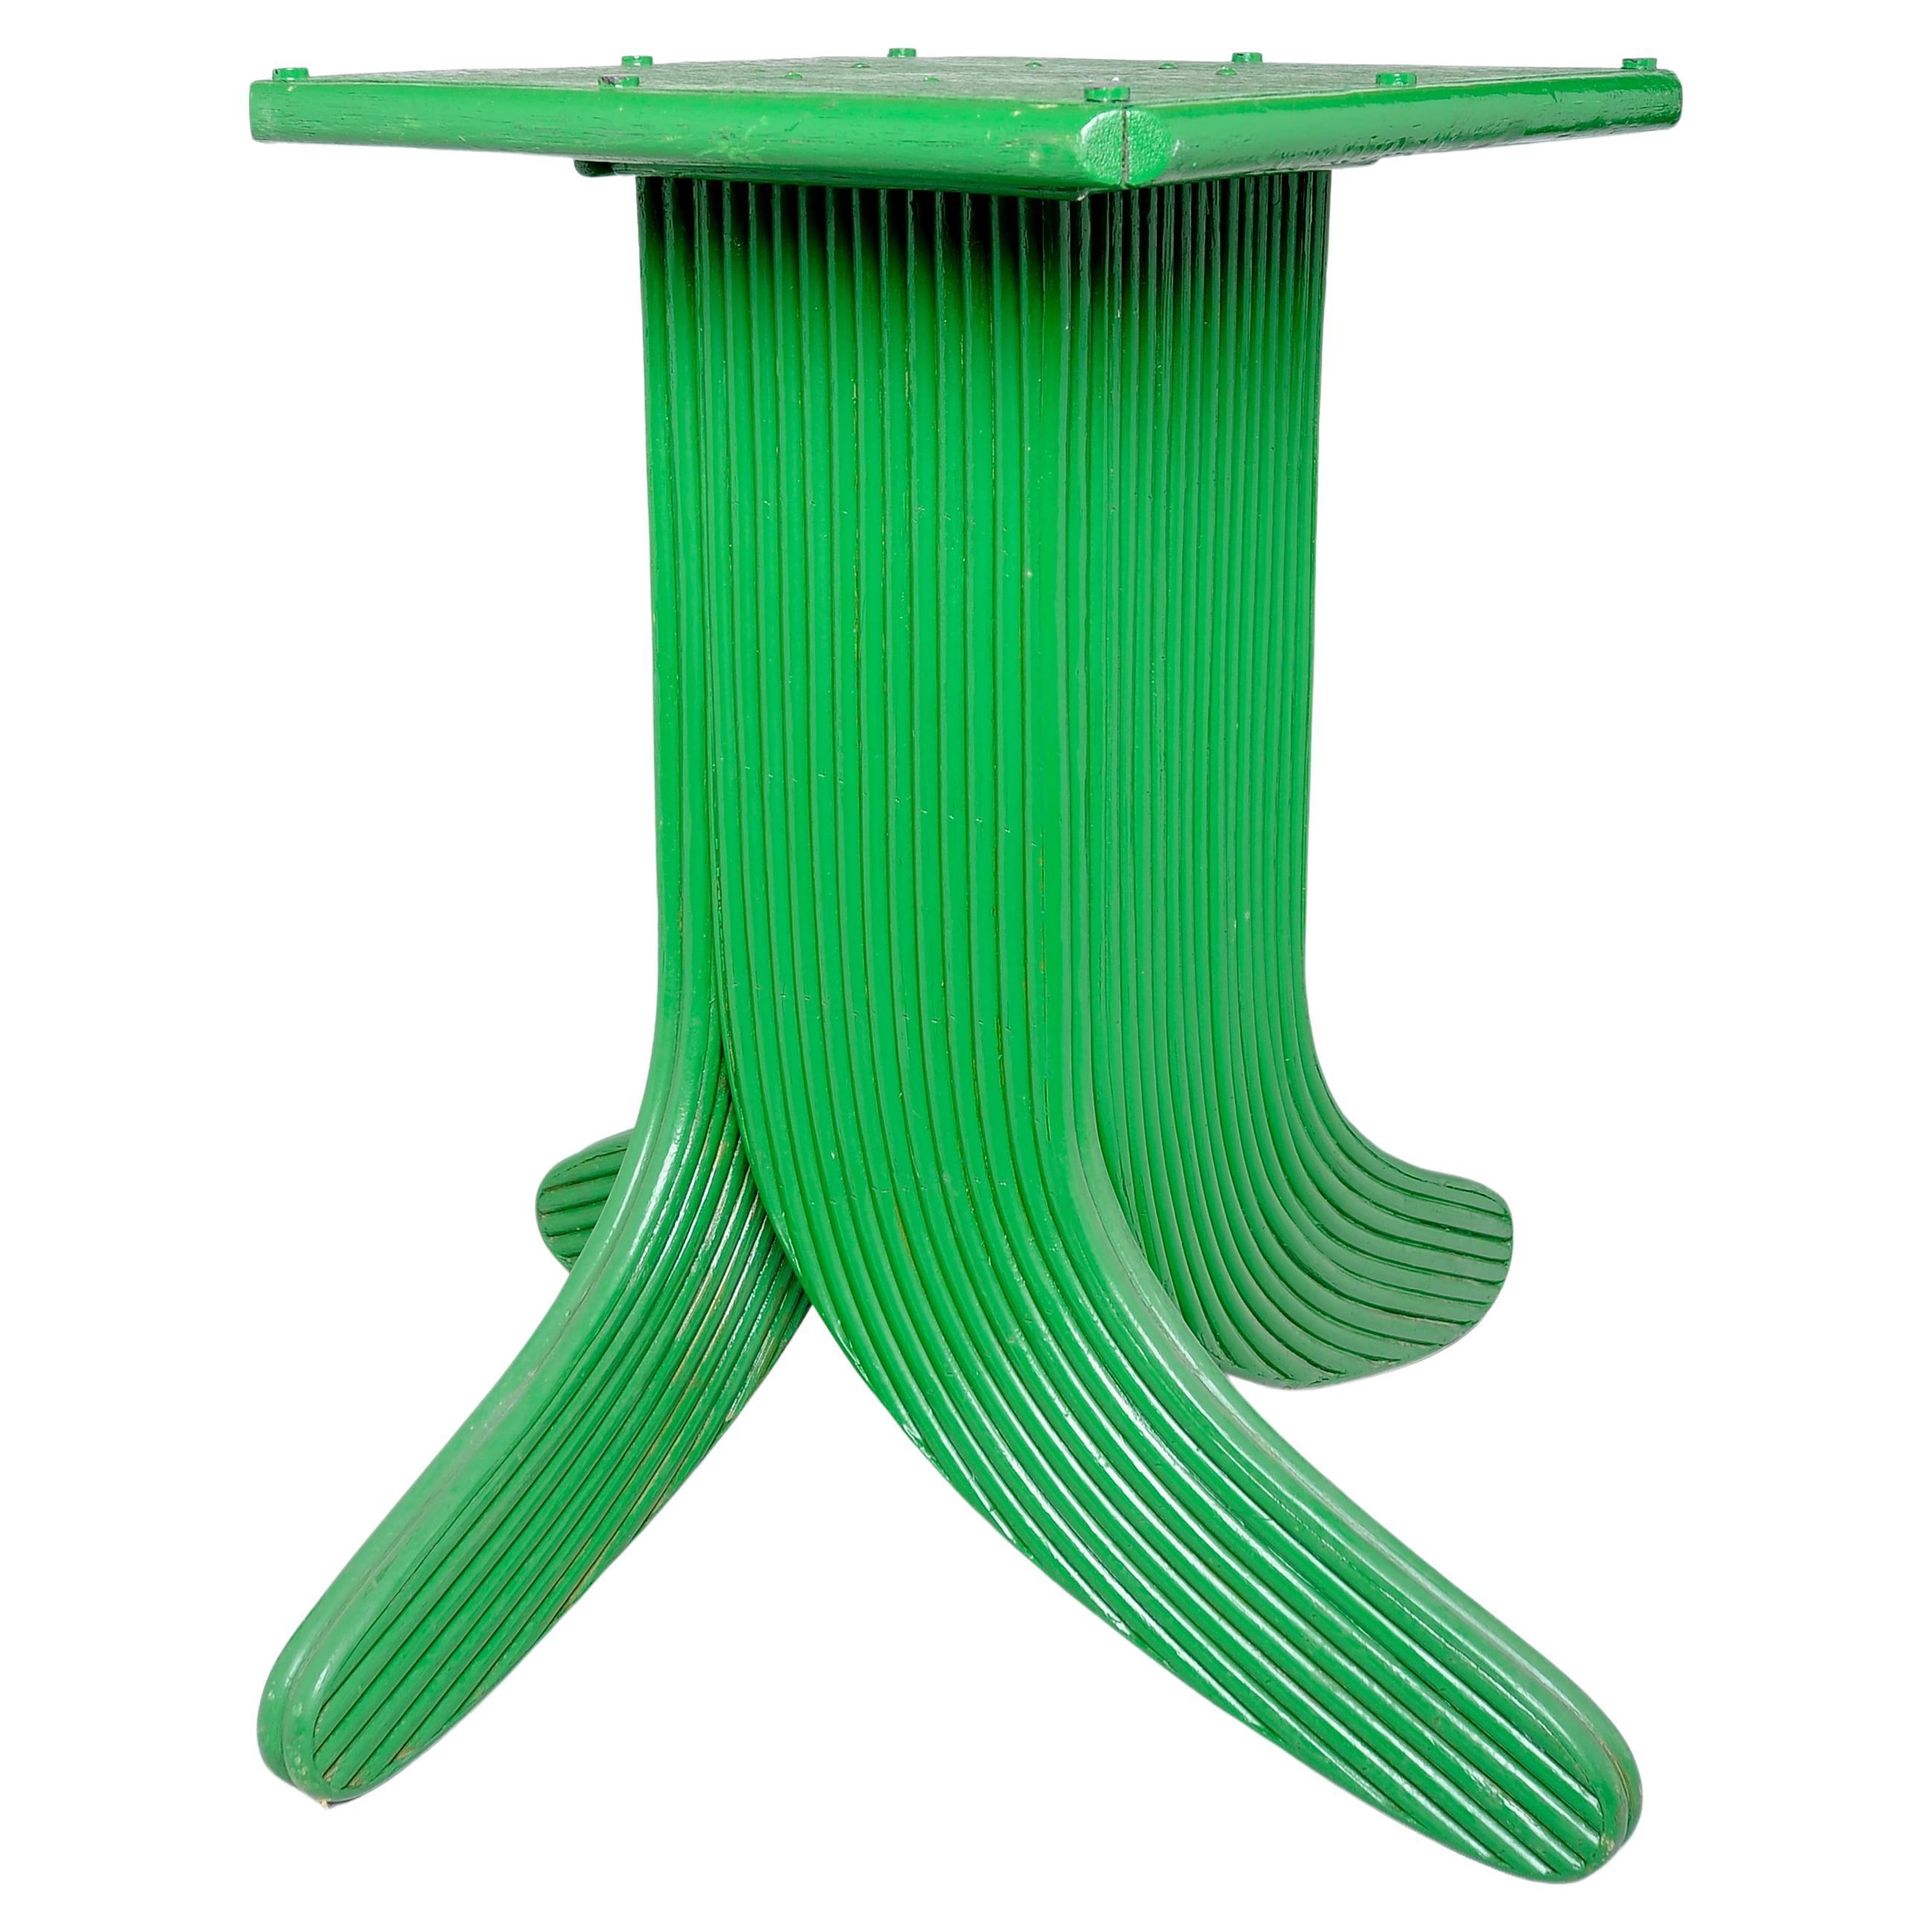 Modern Service or Center Little Table in Green Lacquered Wood